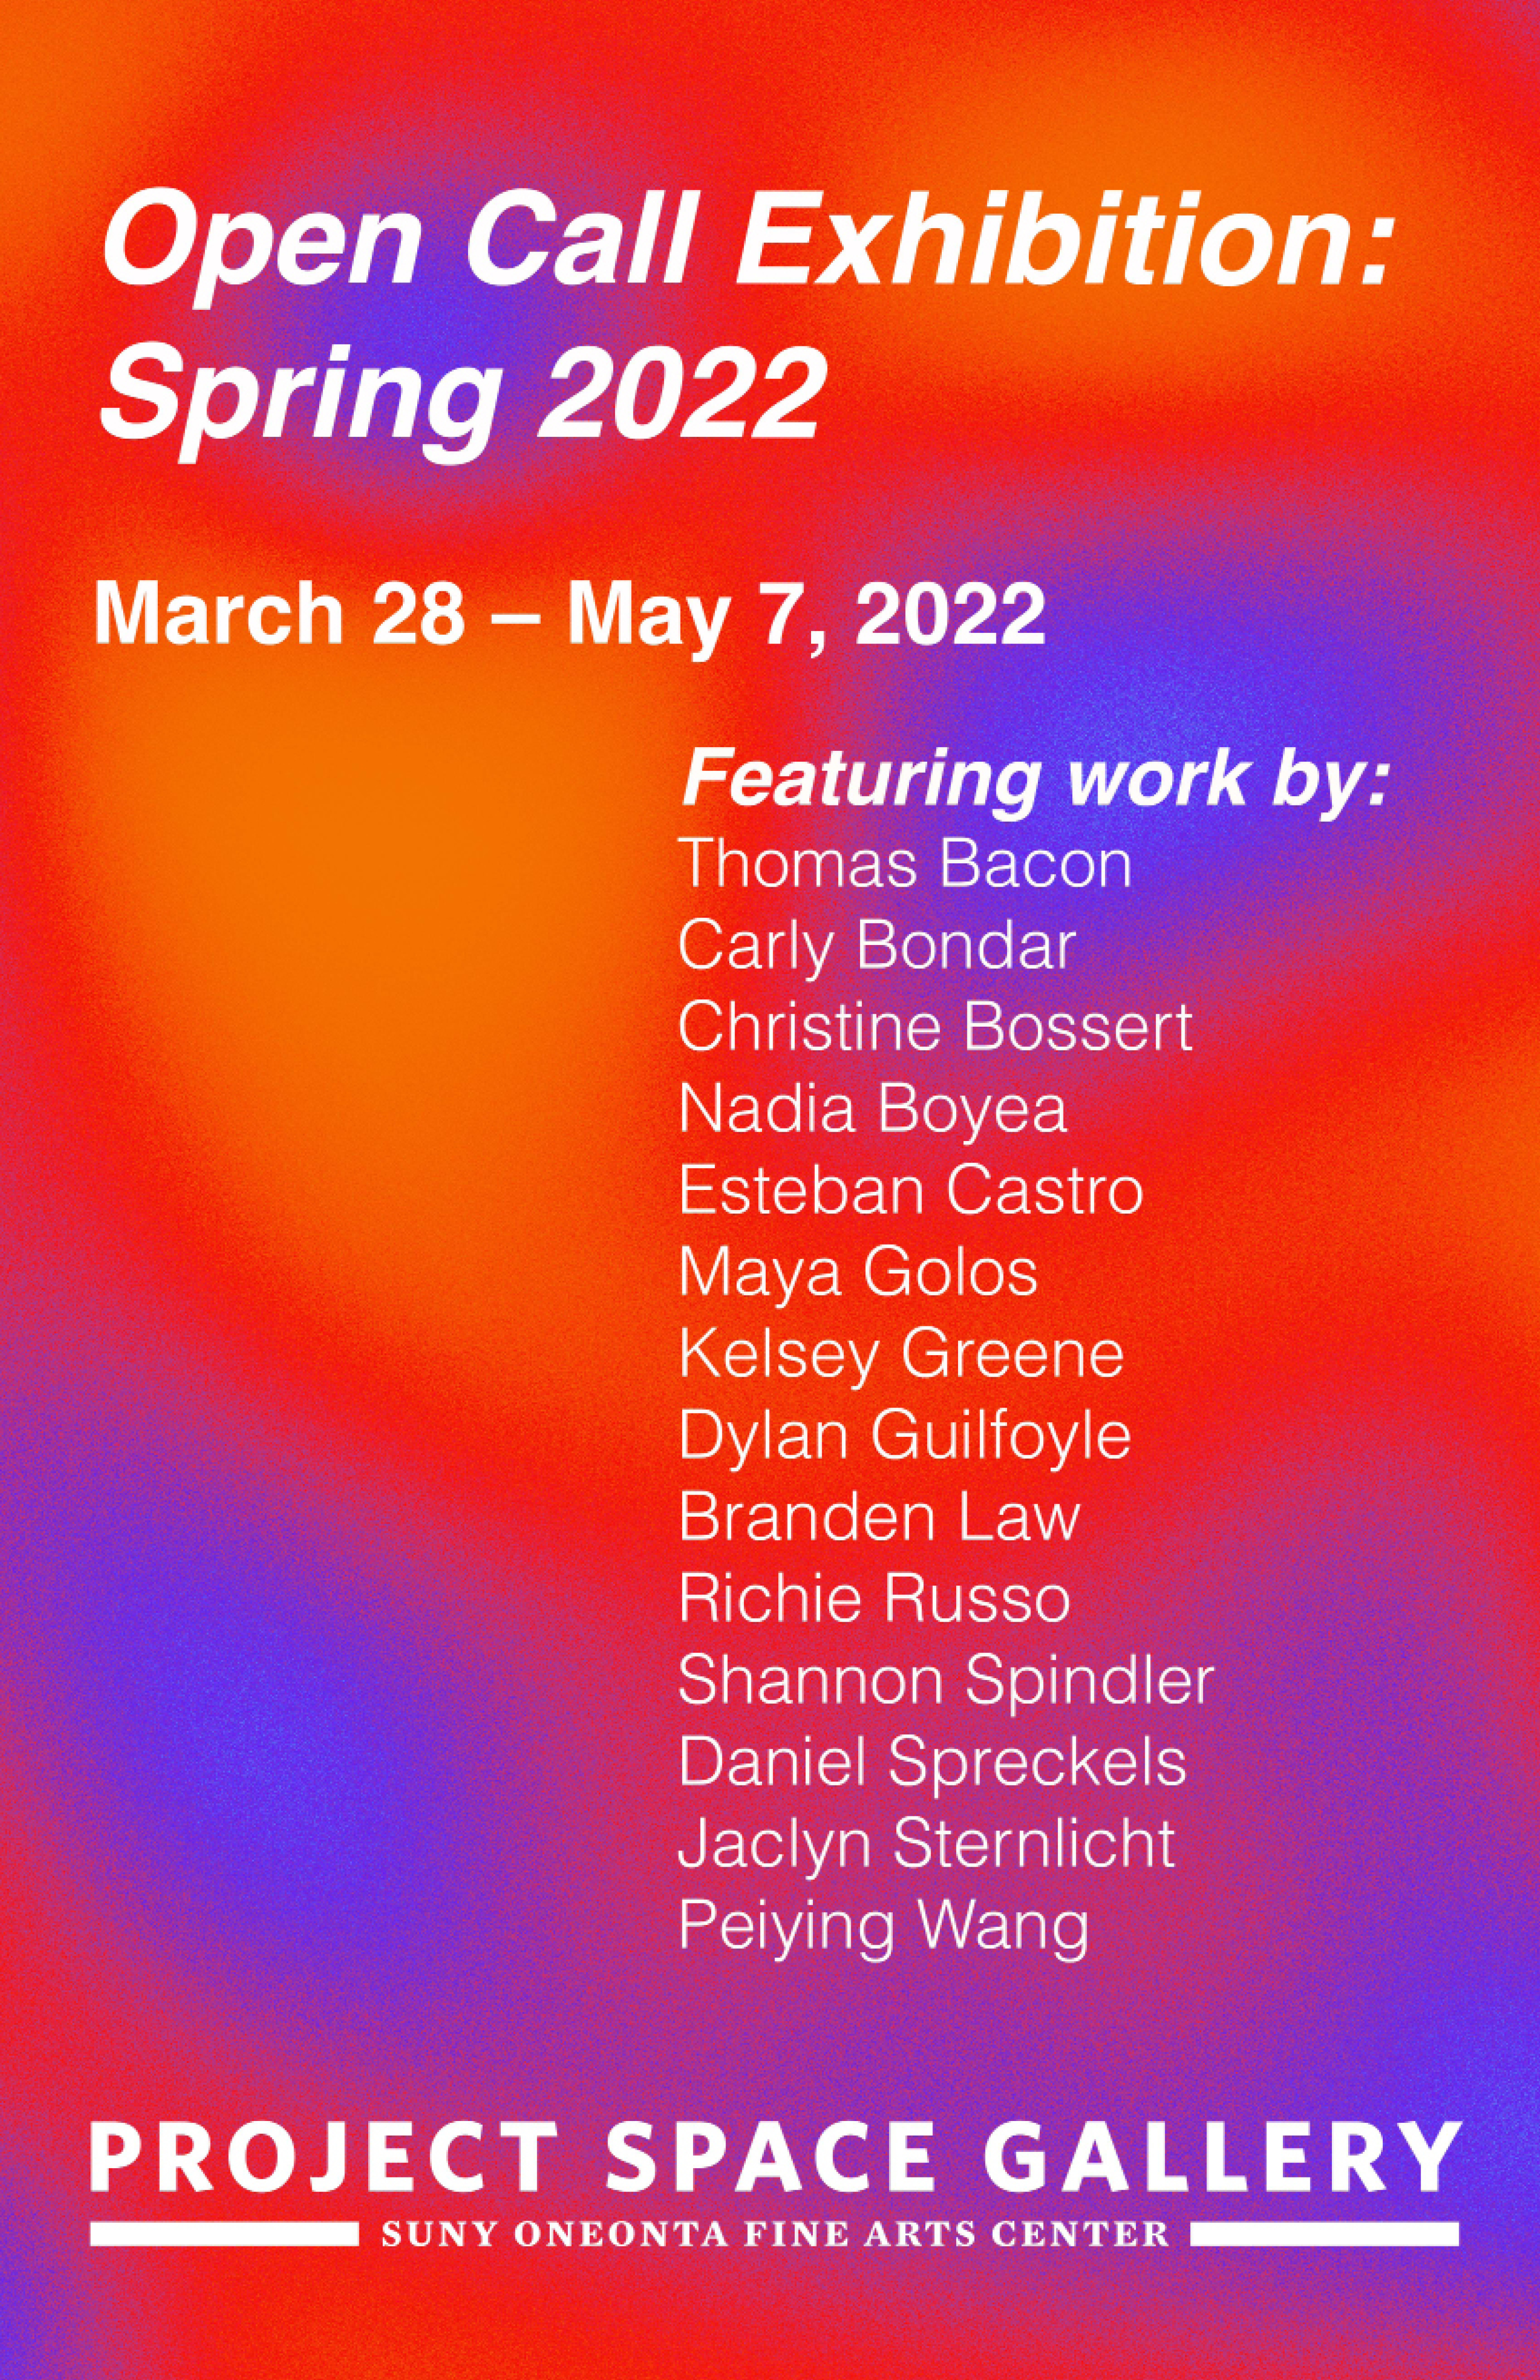 Suny Oneonta 2022 Calendar Exhibitions | Project Space Gallery And Gallery Lobby | Suny Oneonta